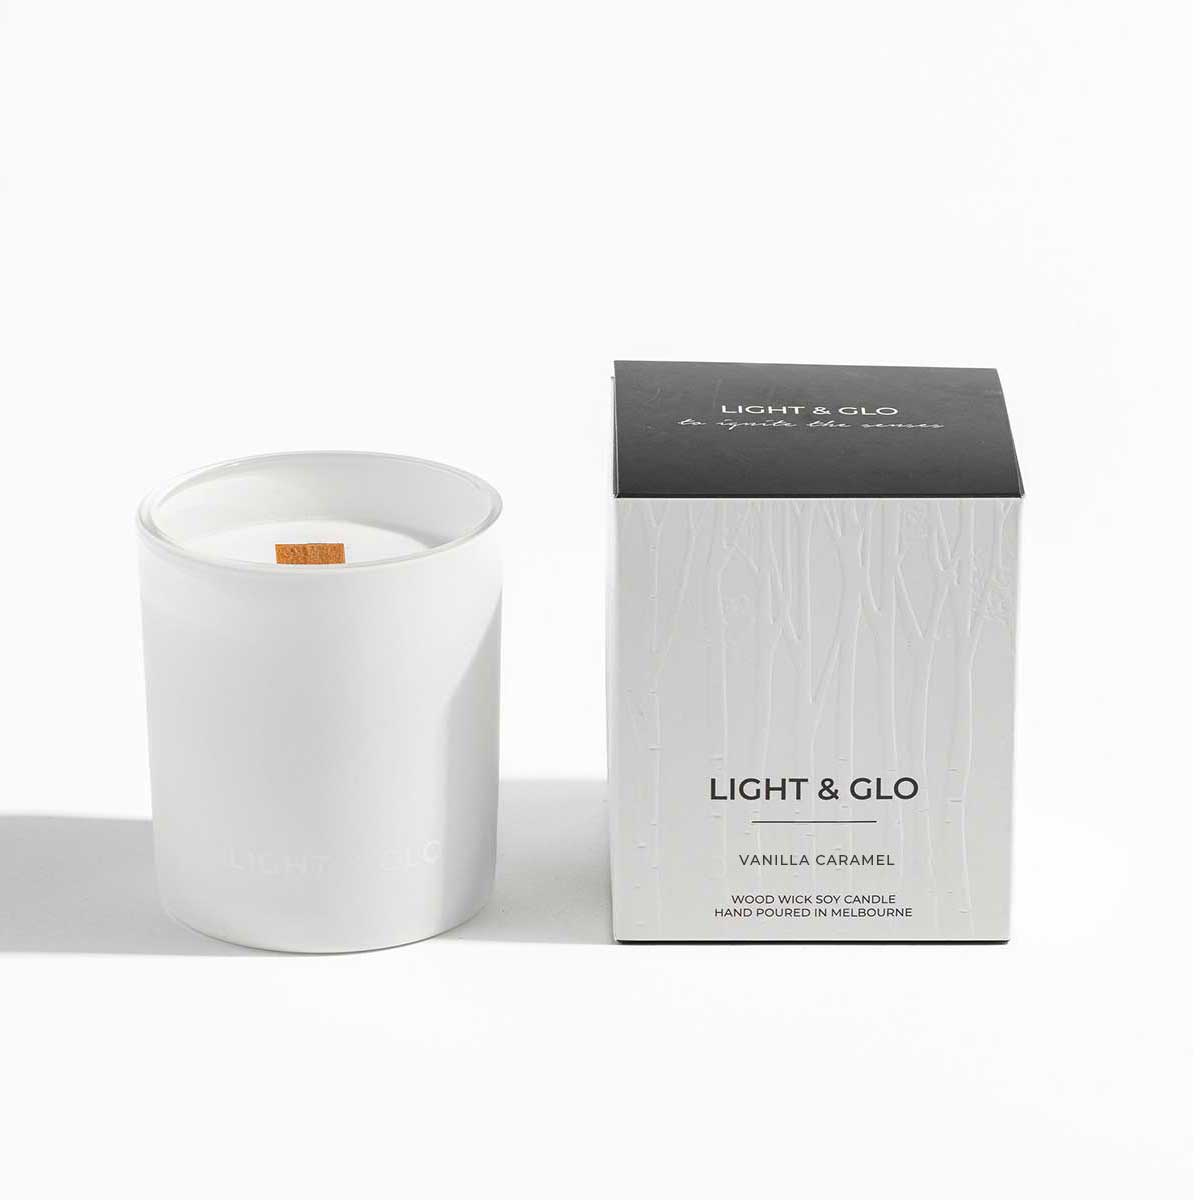 Vanilla Caramel - Monochrome Large 300g Candle | Luxury Candles &amp; Home Fragrances by Light + Glo